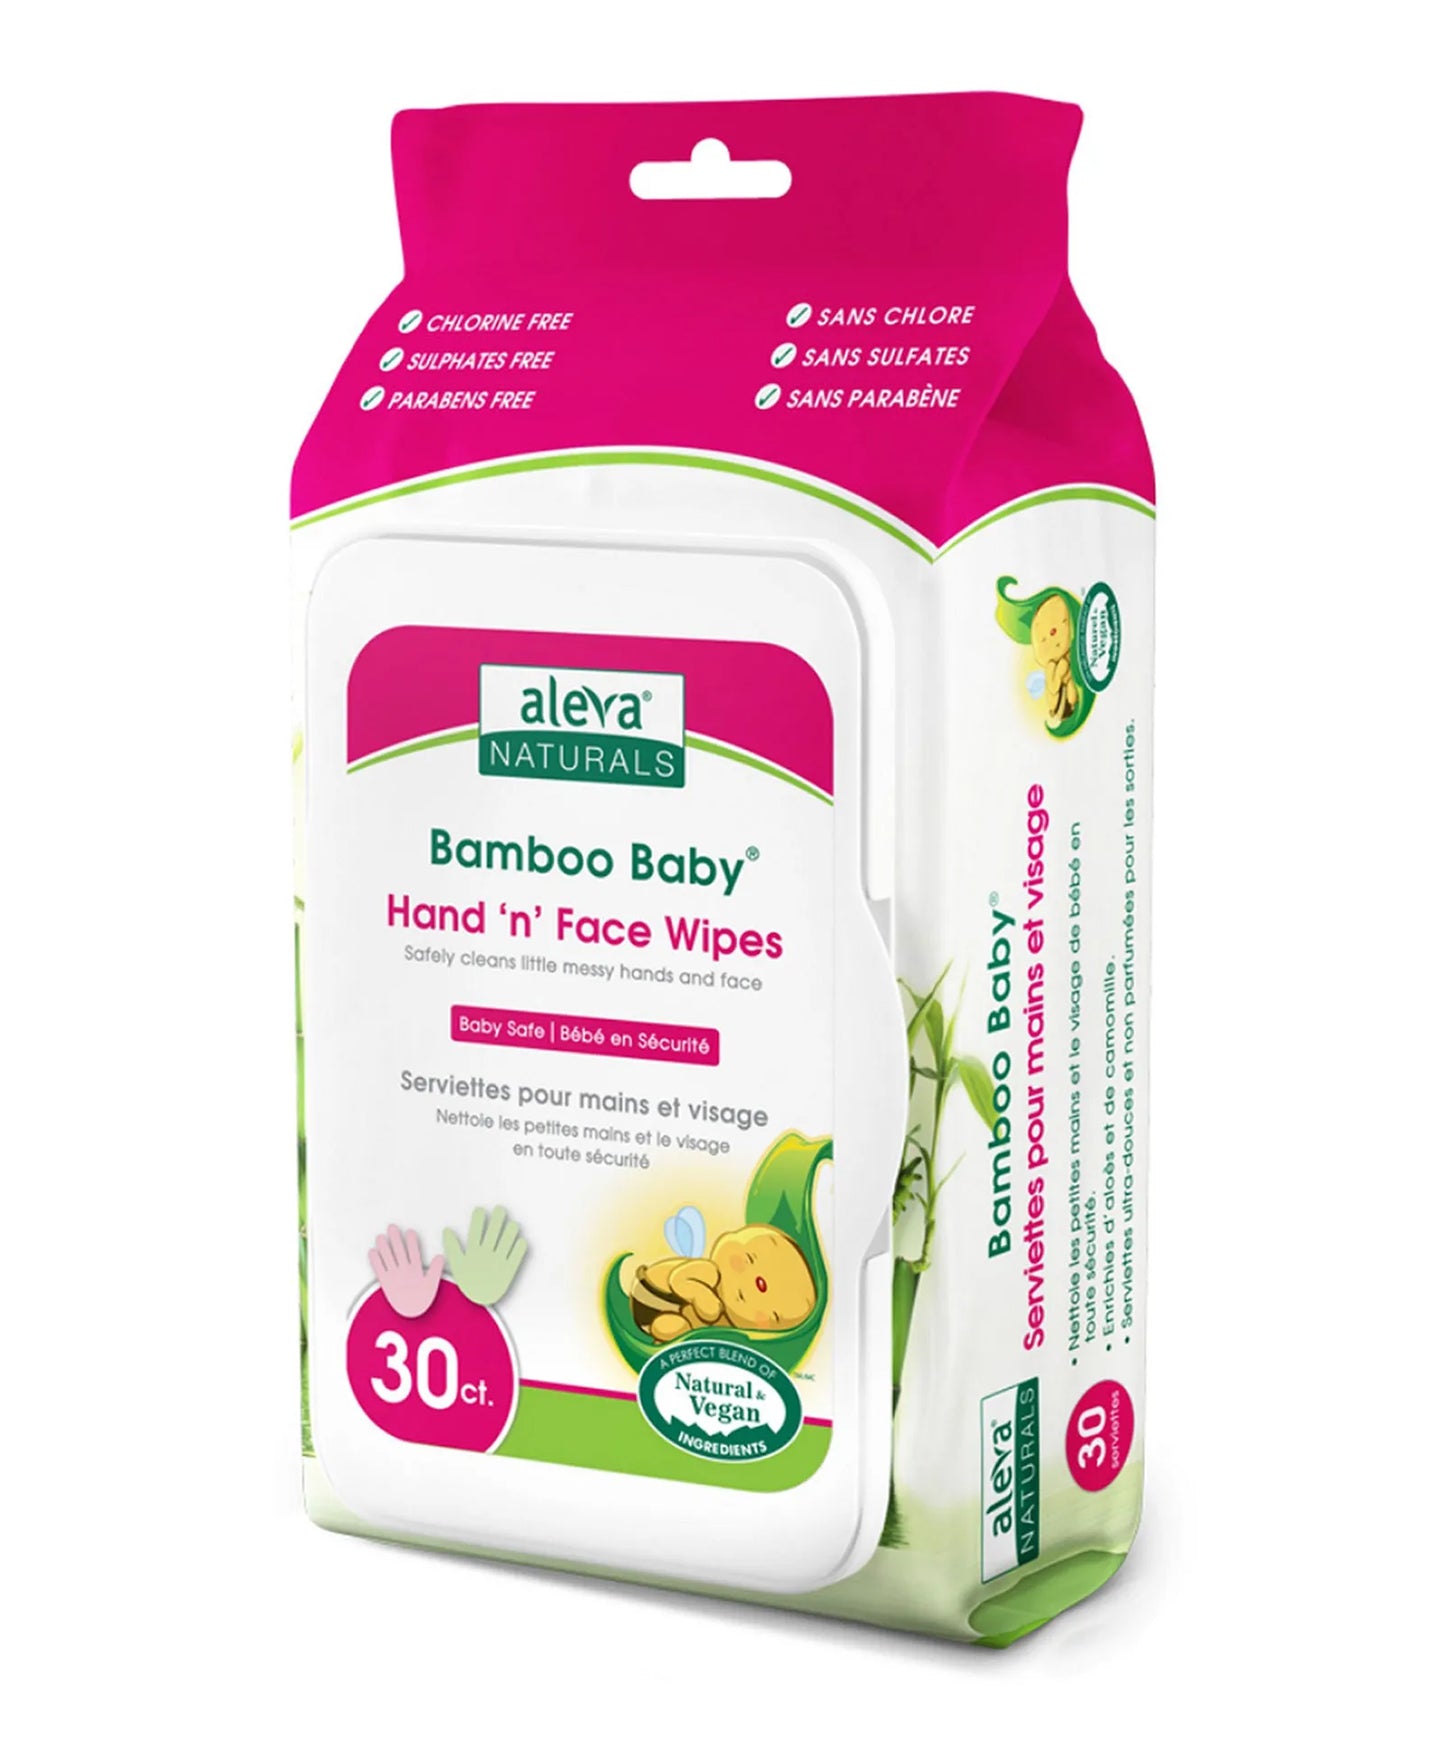 Aleva Naturals Bamboo Baby Specialty Hand 'N' Face Wipes - 30ct